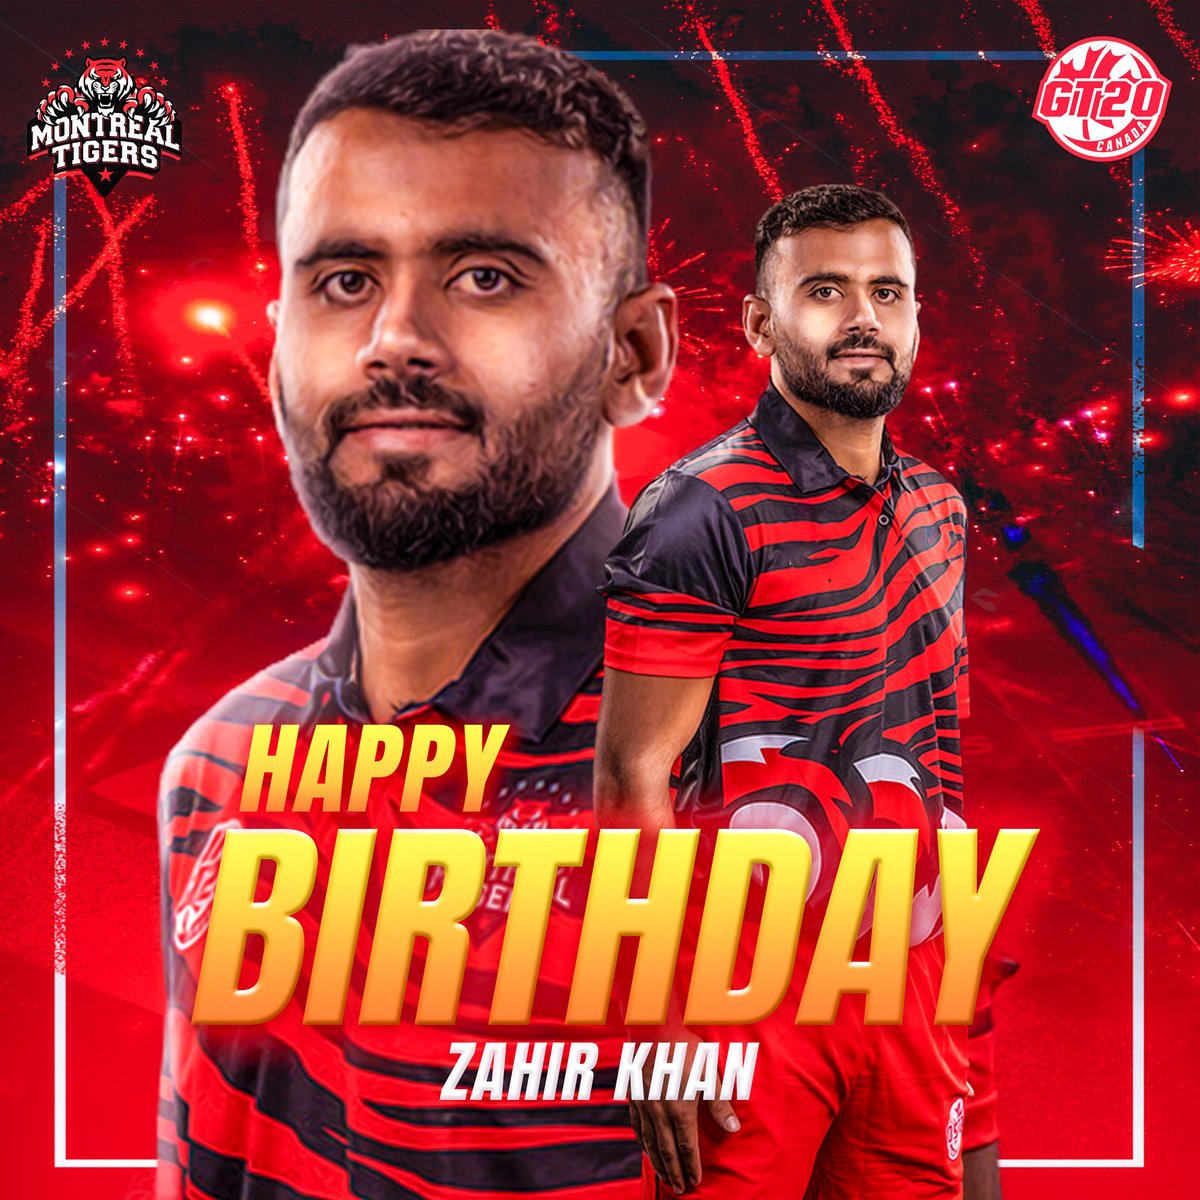 🎉🎂 Wishing a fantastic birthday to Zaheer Khan! 🏏🇦🇫 May your day be filled with joy, cricketing triumphs, and memorable moments. 🌟🥳 

#montrealtigers #gt20canada #roarwithus #HappyBirthdayZaheerKhan #AfghanistanCricket #CricketCelebrations